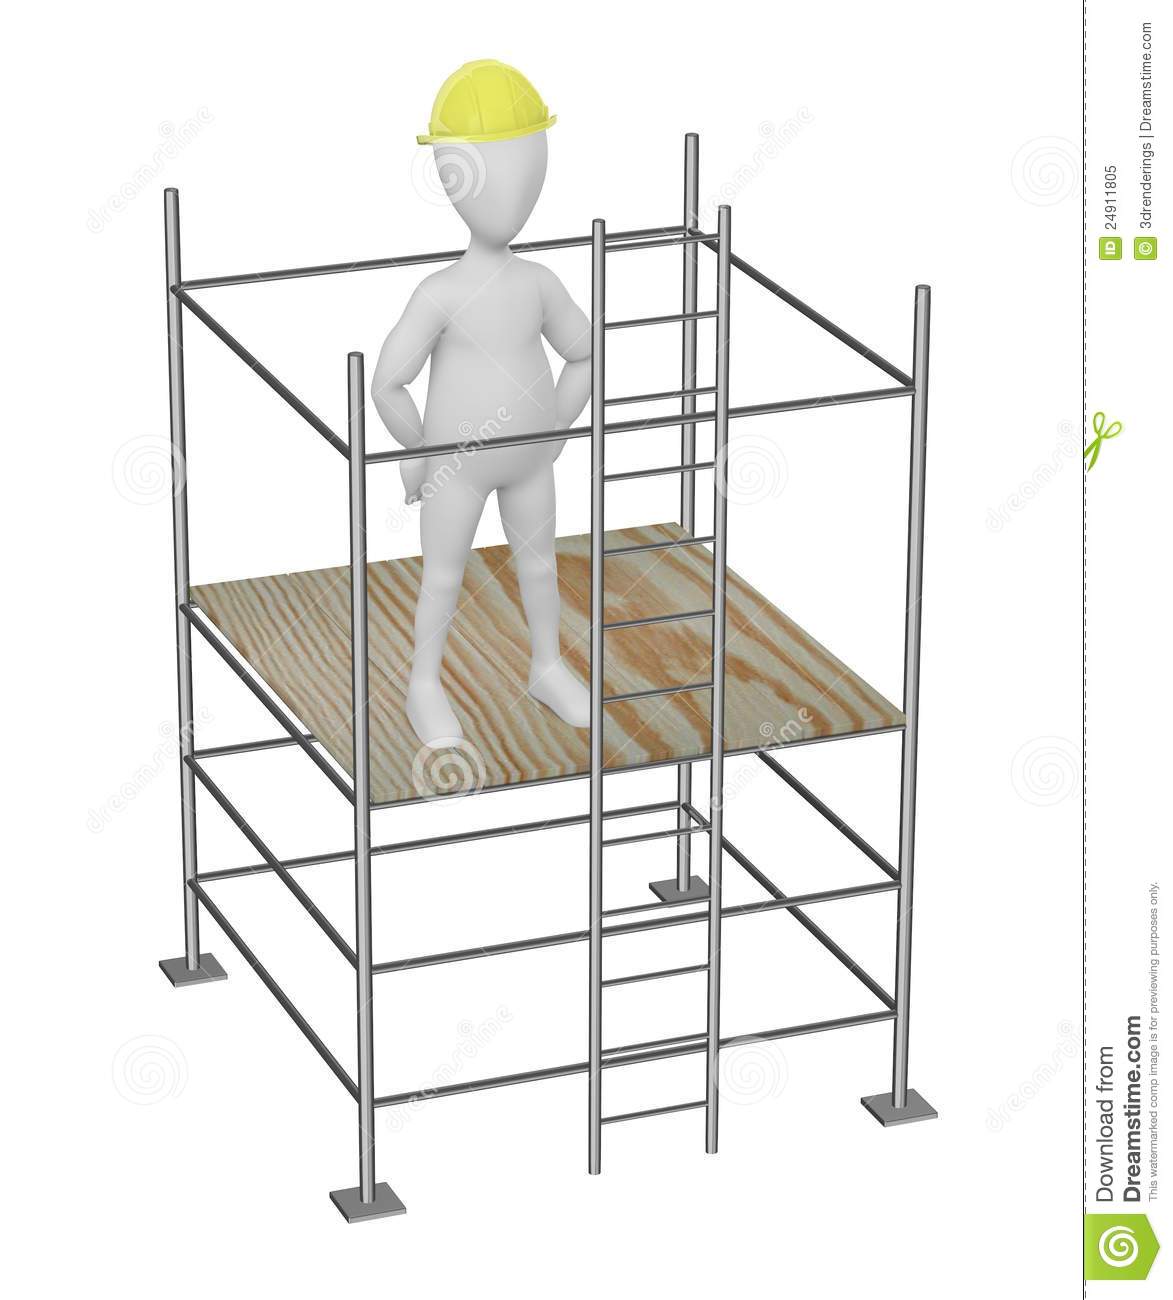 Cartoon Character On Scaffolding   Not Working Royalty Free Stock